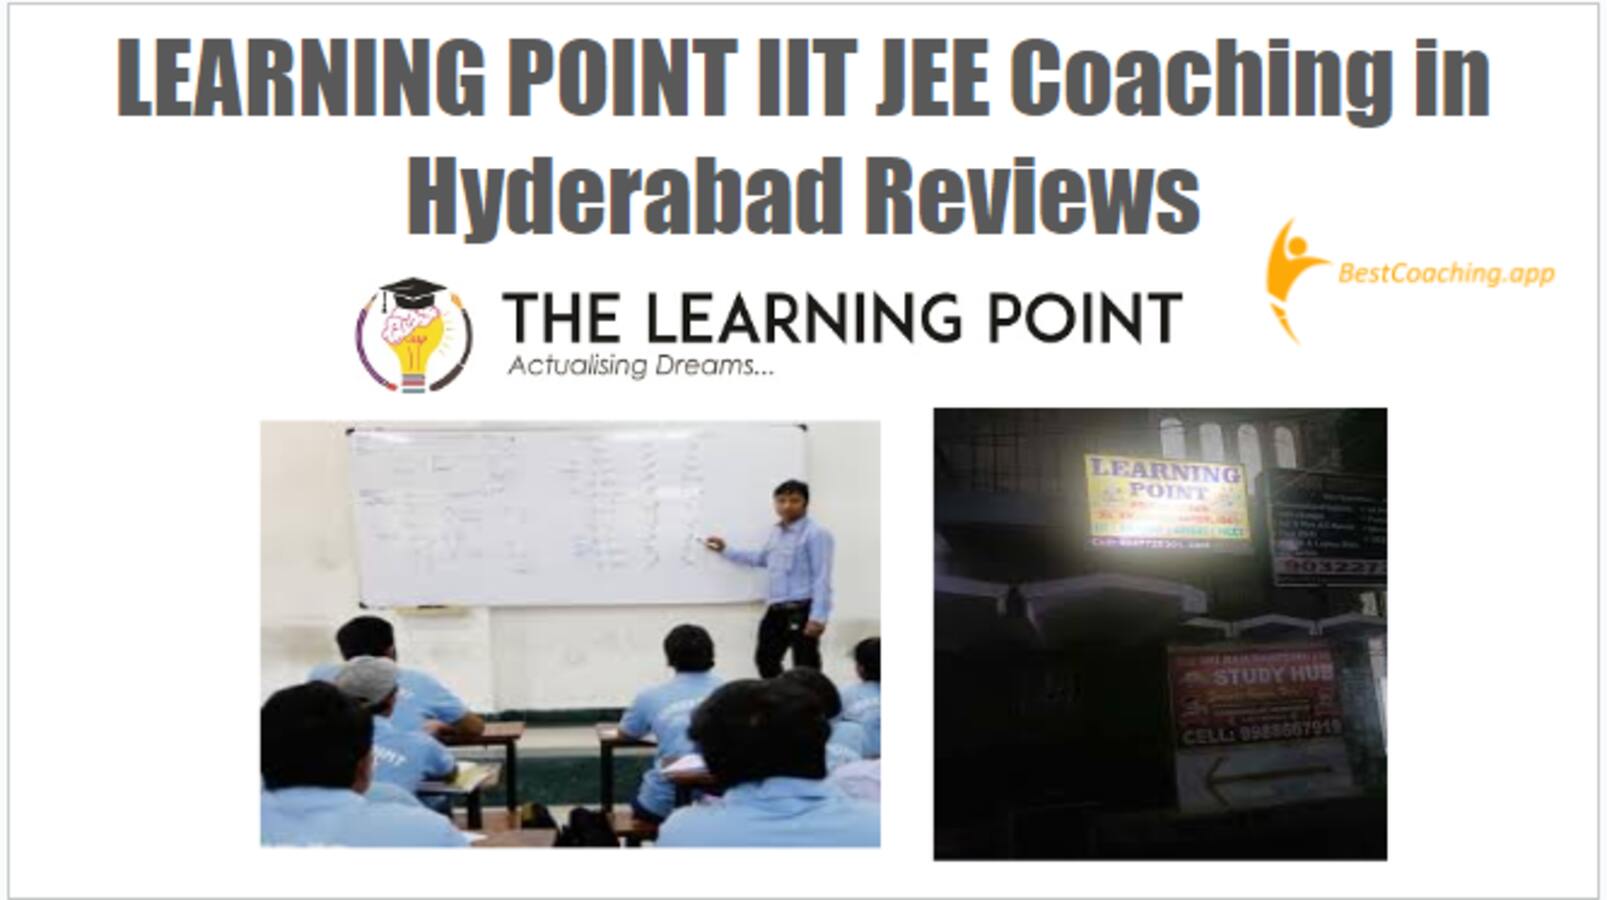 LEARNING POINT IIT JEE Coaching in Hyderabad Reviews